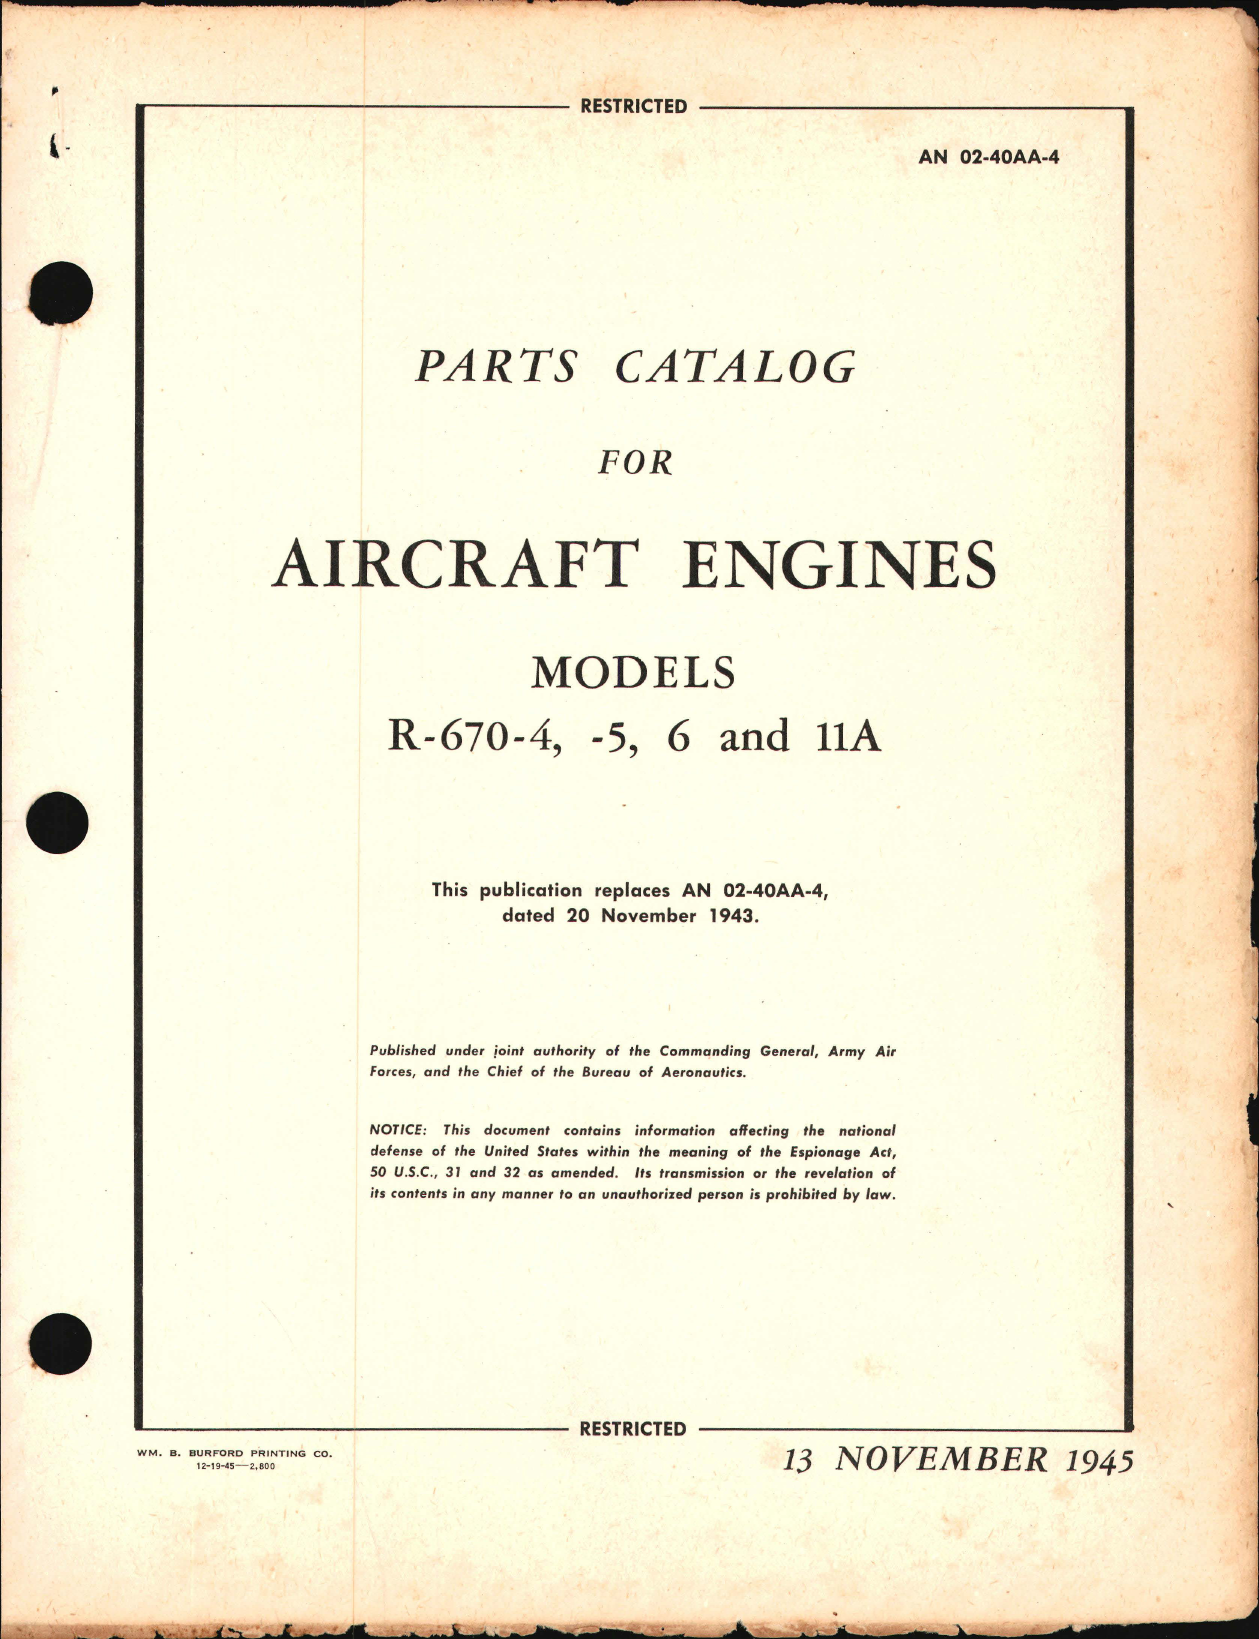 Sample page 1 from AirCorps Library document: Parts Catalog for Aircraft Engines R-670-4, R-670-5, R-670-6, and R-670-11